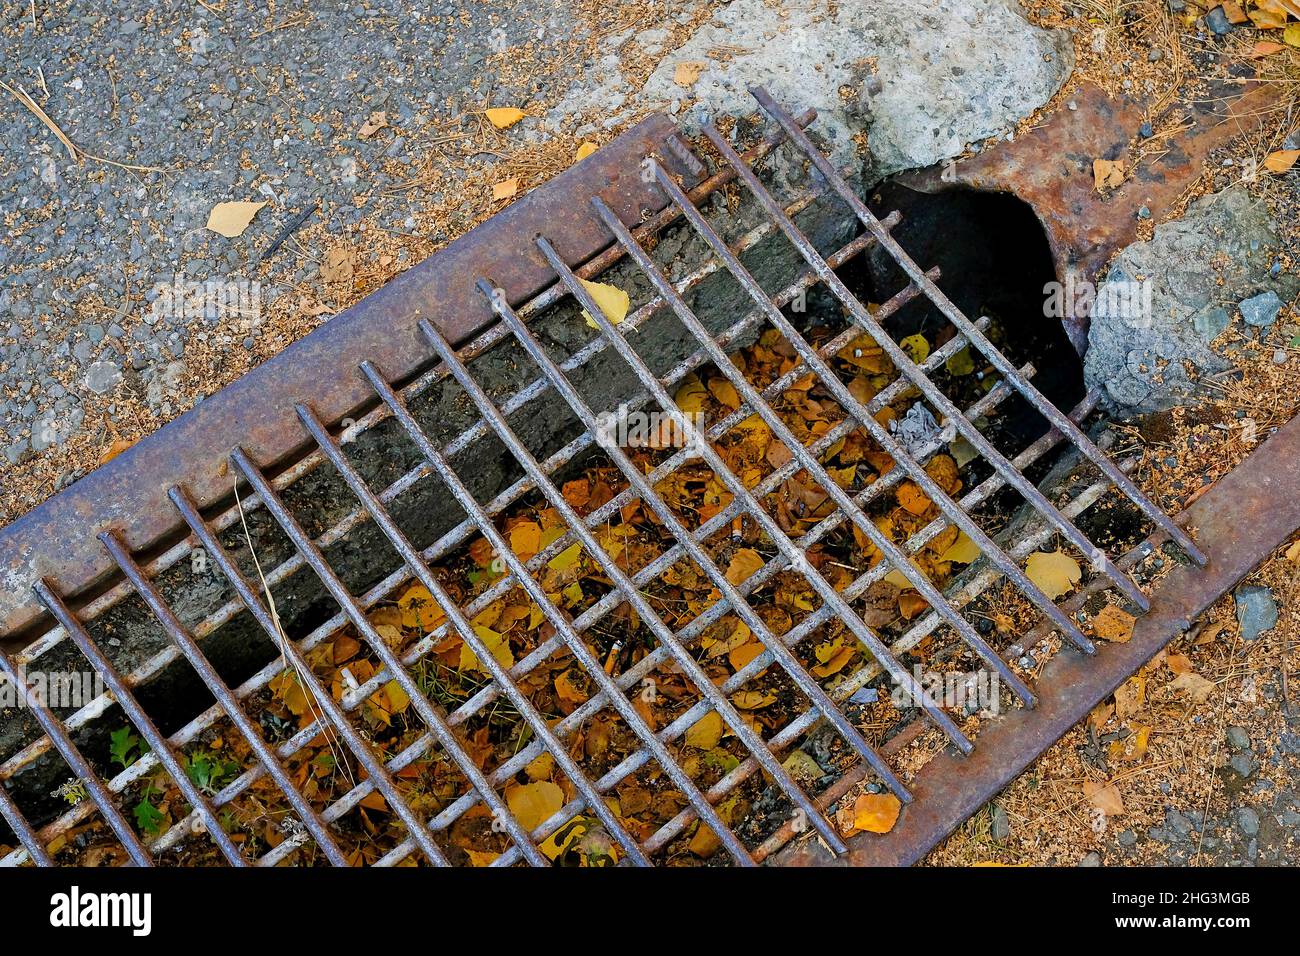 Iron grate on the drain for tiles or rainwater. Autumn leaves, top view. Stock Photo